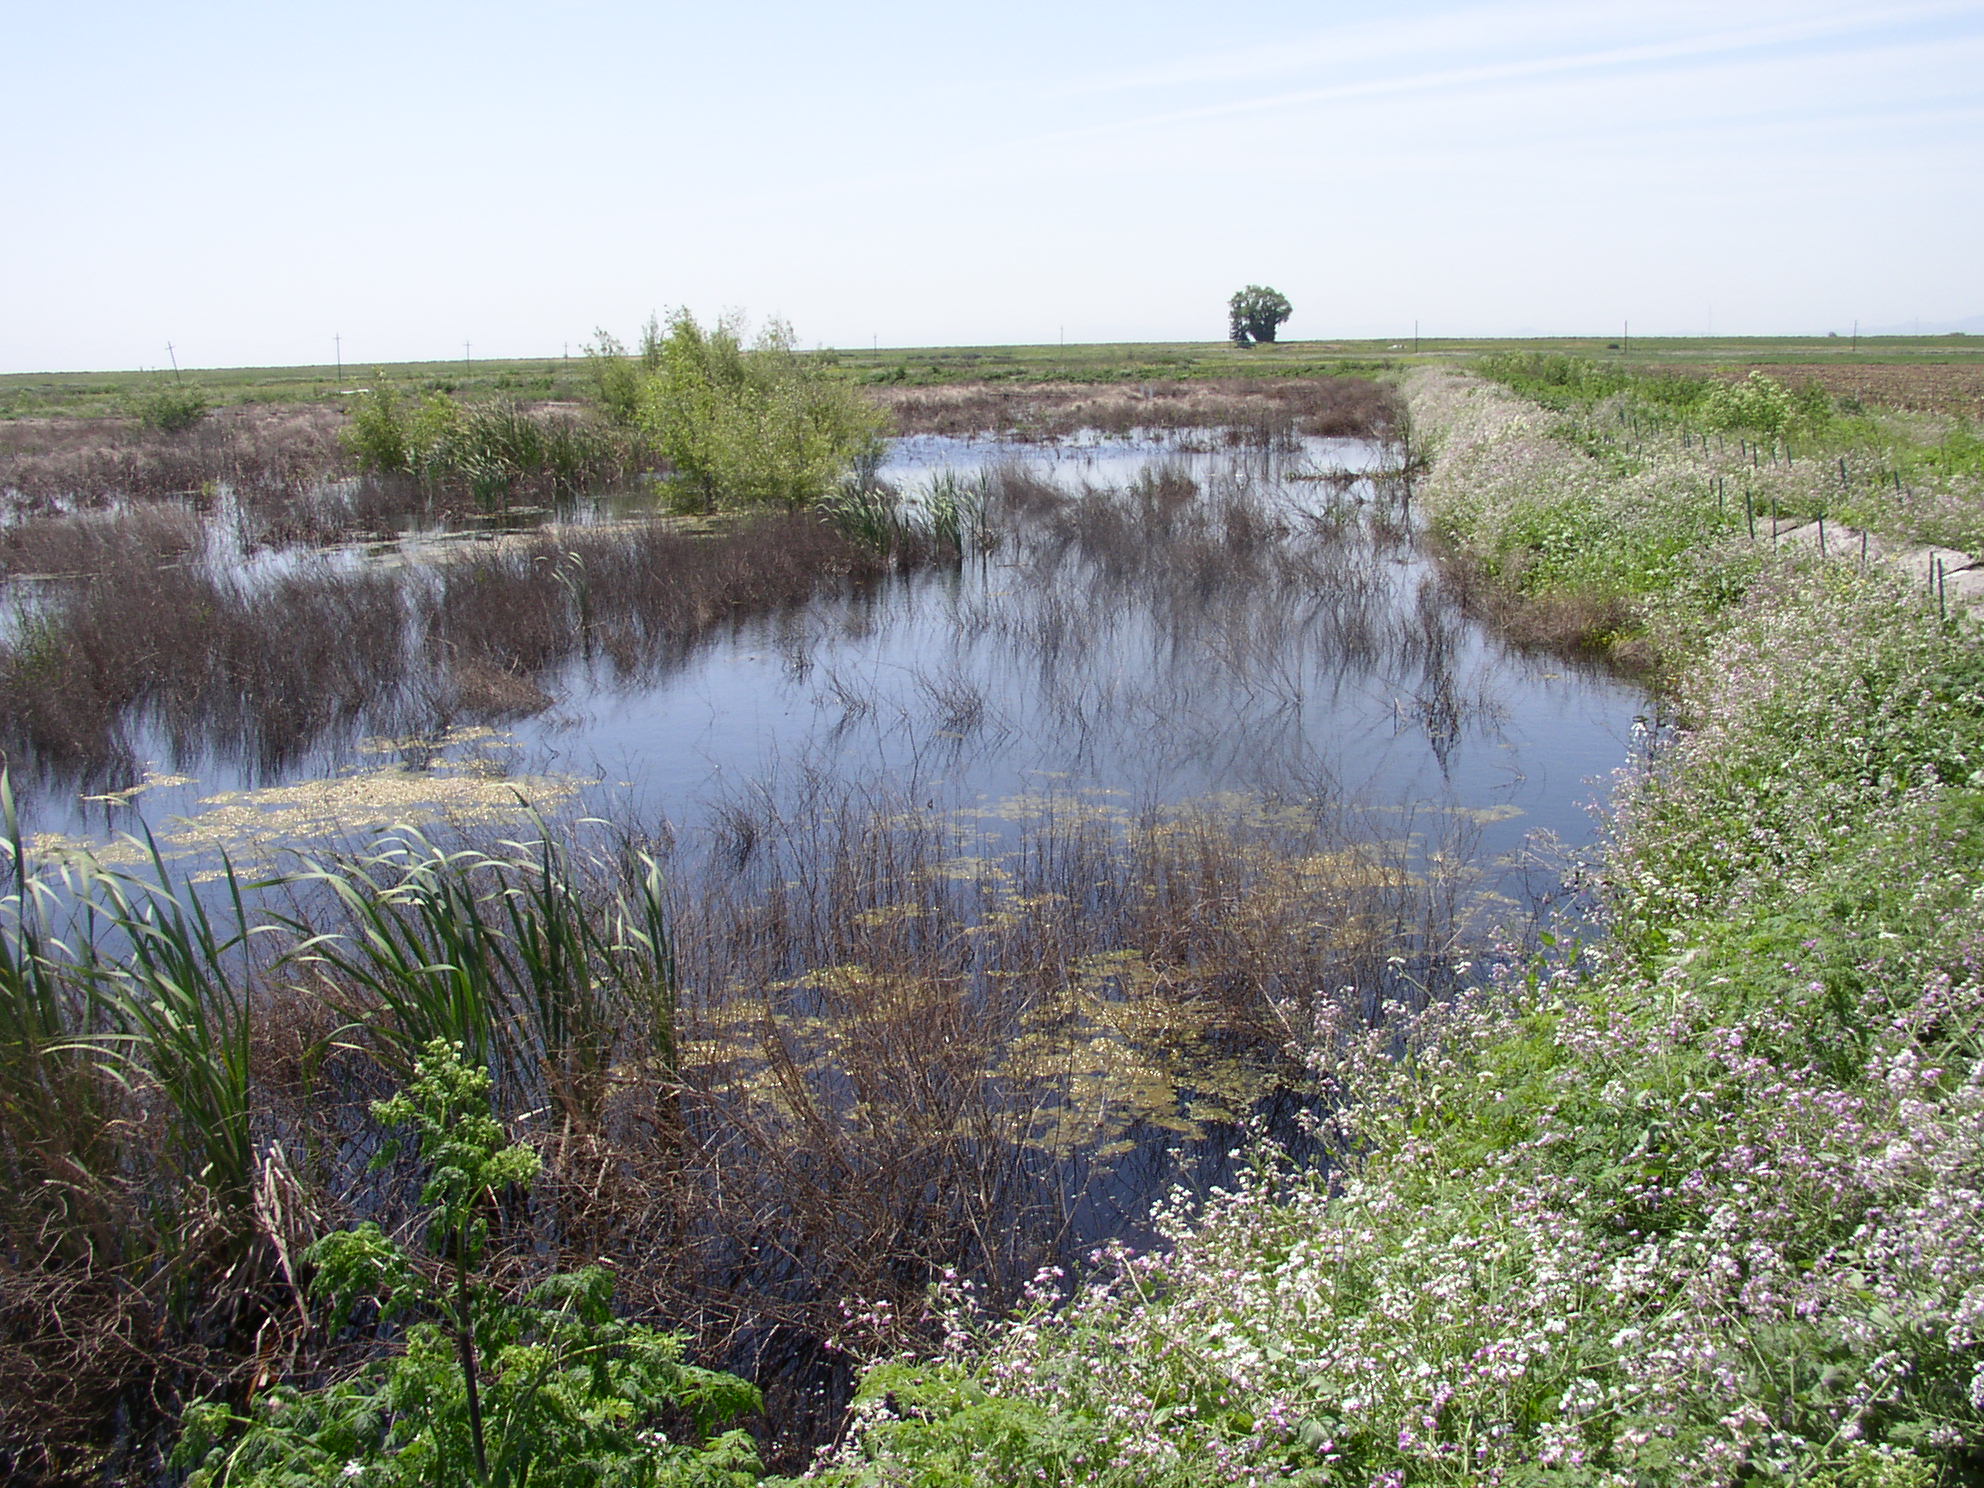 HydroFocus personnel evaluate wetlands hydrology, water quality and greenhouse gas emissions.